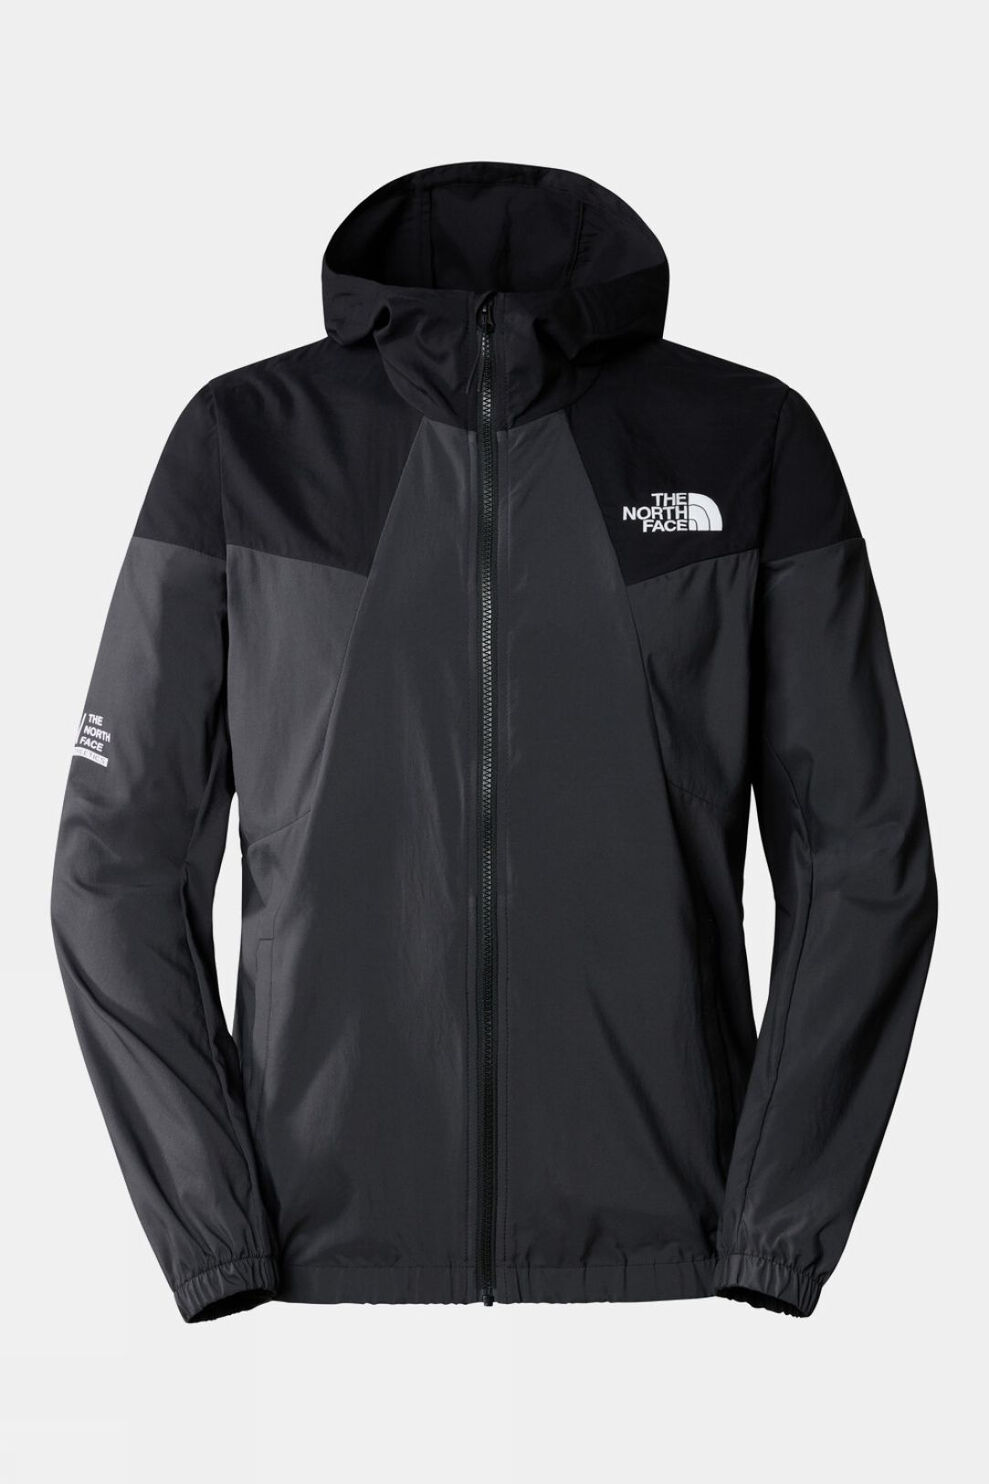 The North Face Mens Mountain Athletics Hooded Wind Track Jacket